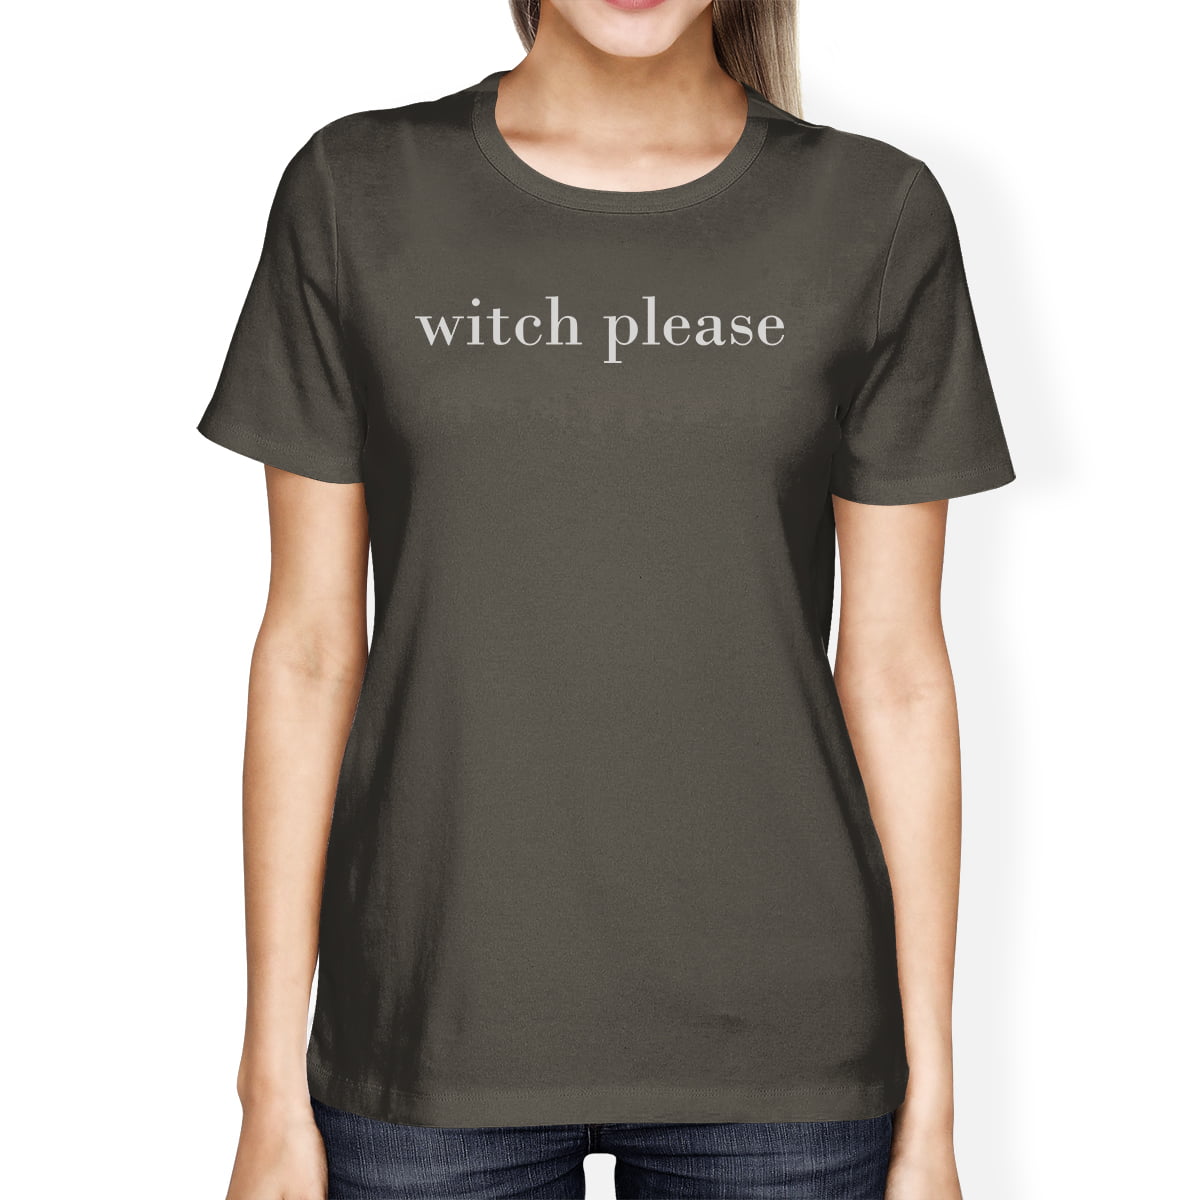 Witch Please  Women Shirt Witch Please Witch Women Shirt Halloween Shirt Witch Shirt Kleding Dameskleding Tops & T-shirts Croptops & Bandeautops Croptops Happy Halloween Shirt 